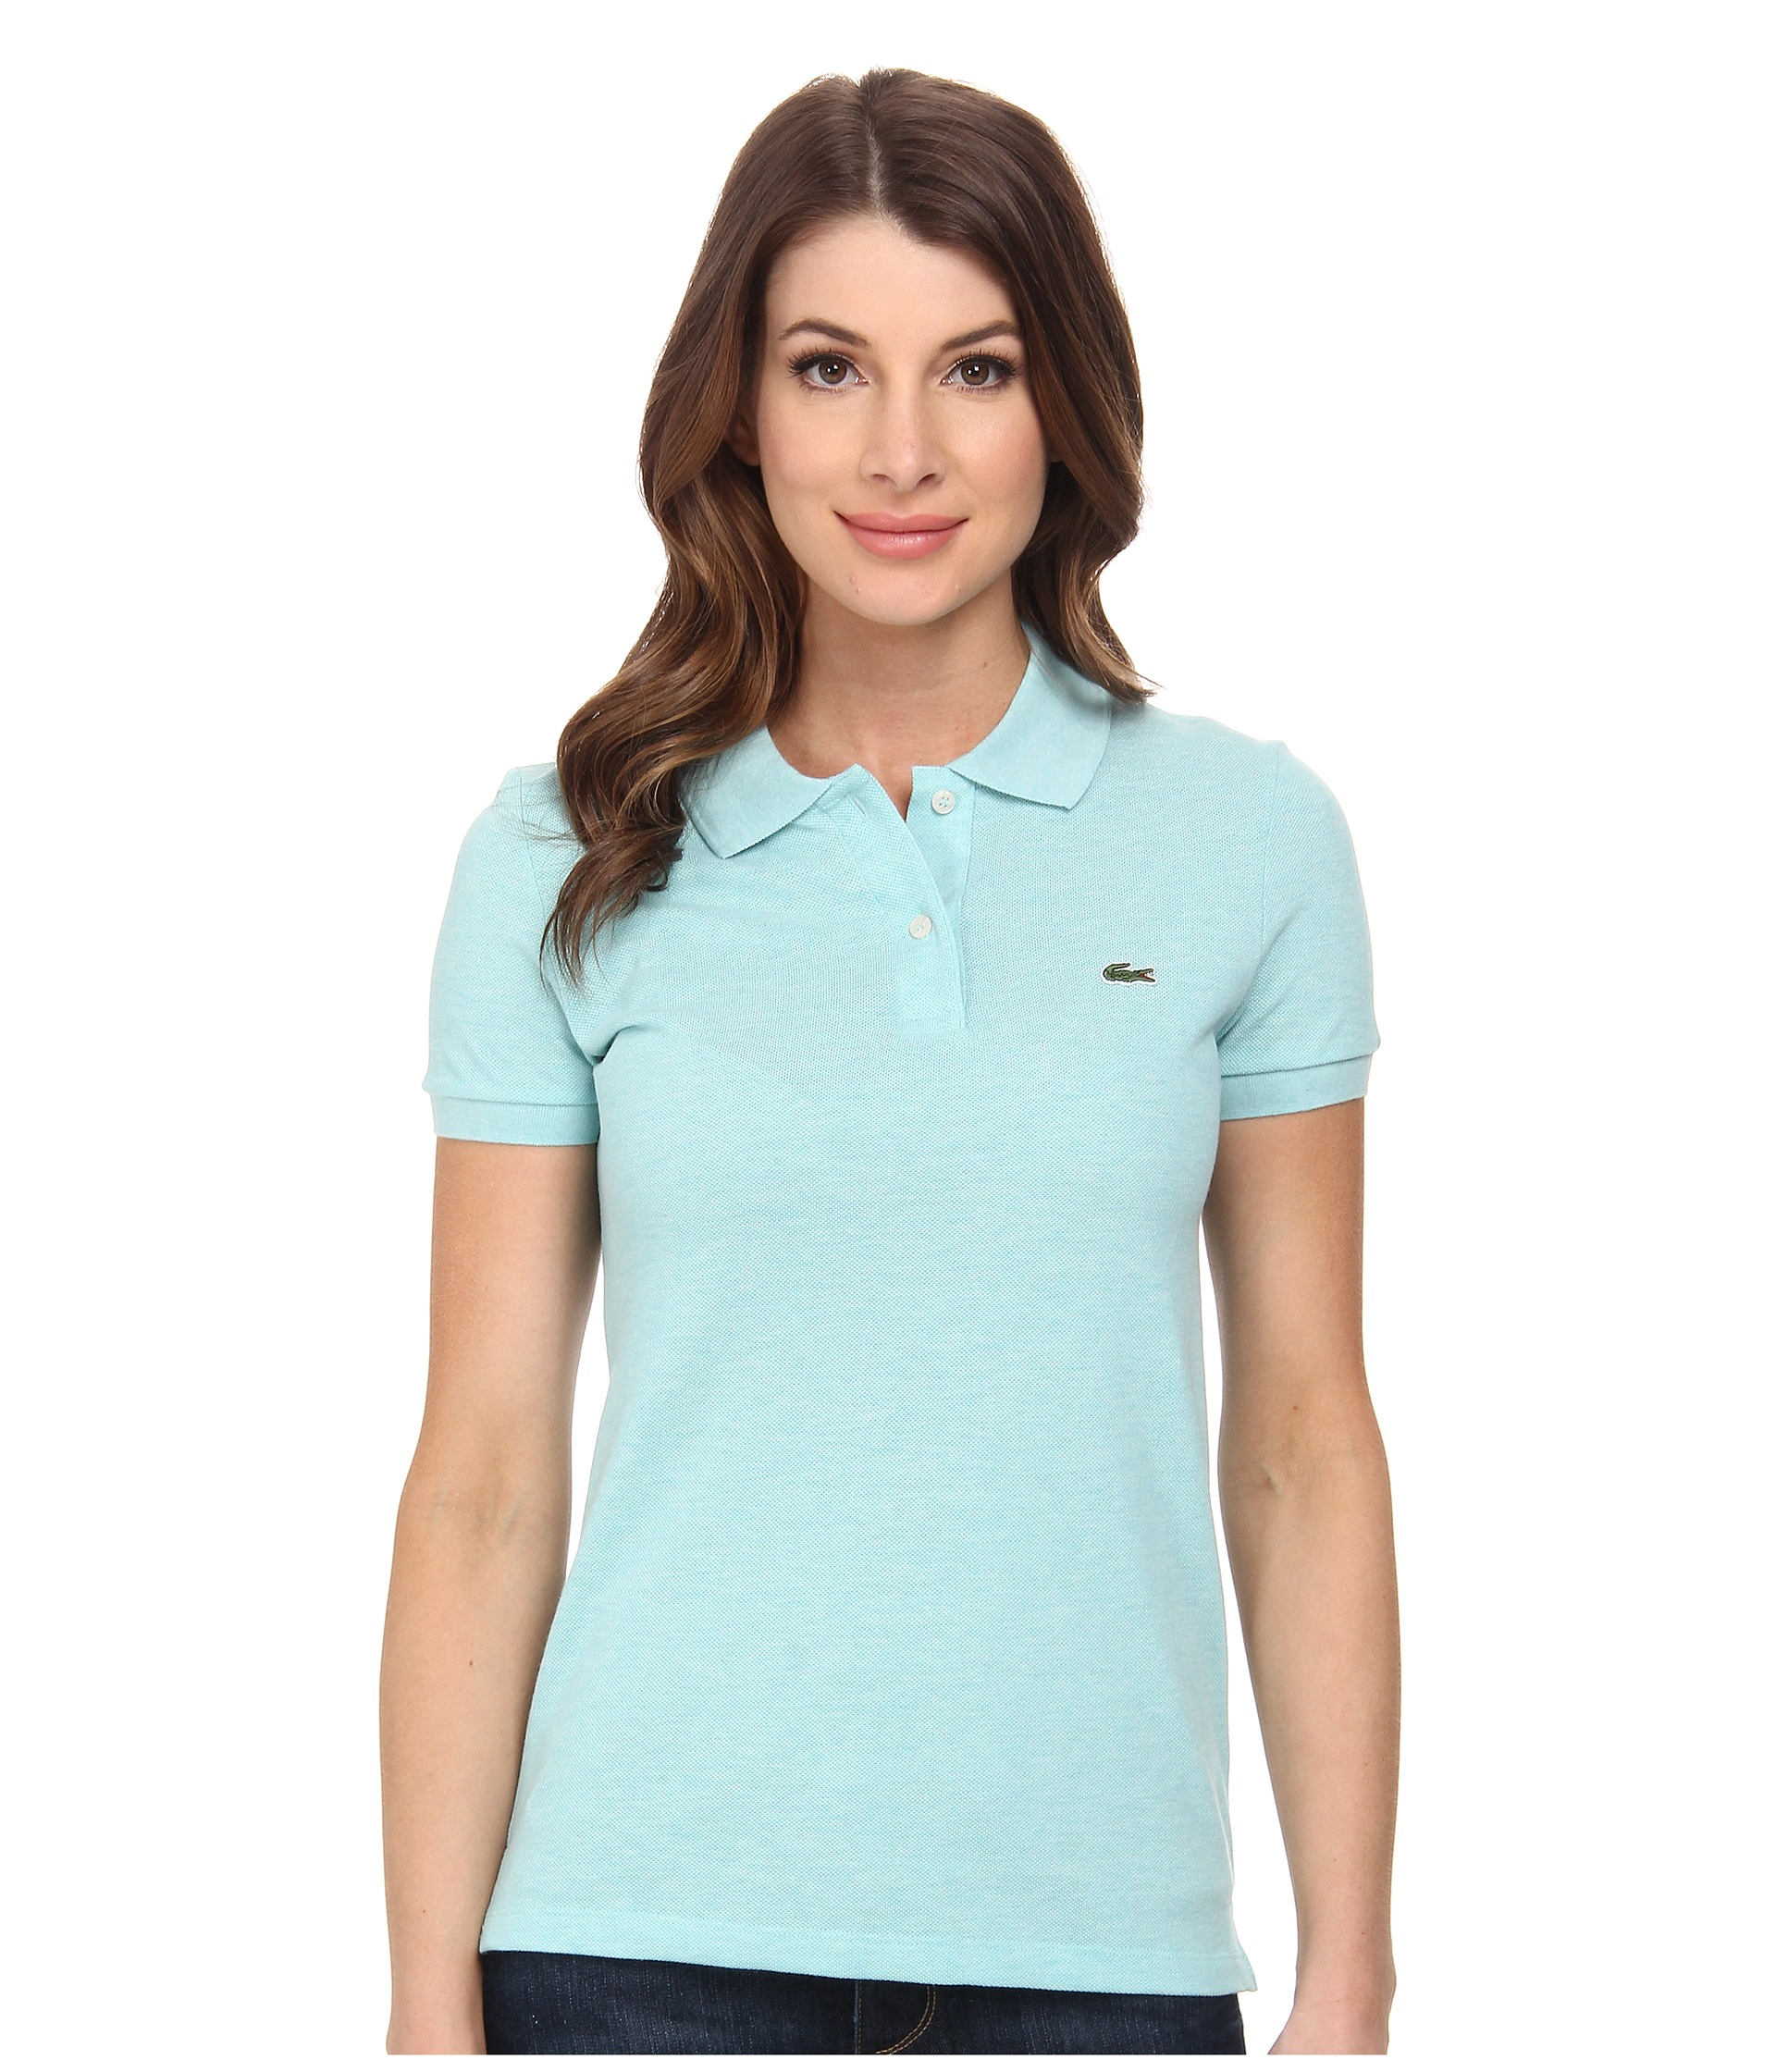 Lyst - Lacoste Short Sleeve Classic Fit Pique Polo Shirt in Blue